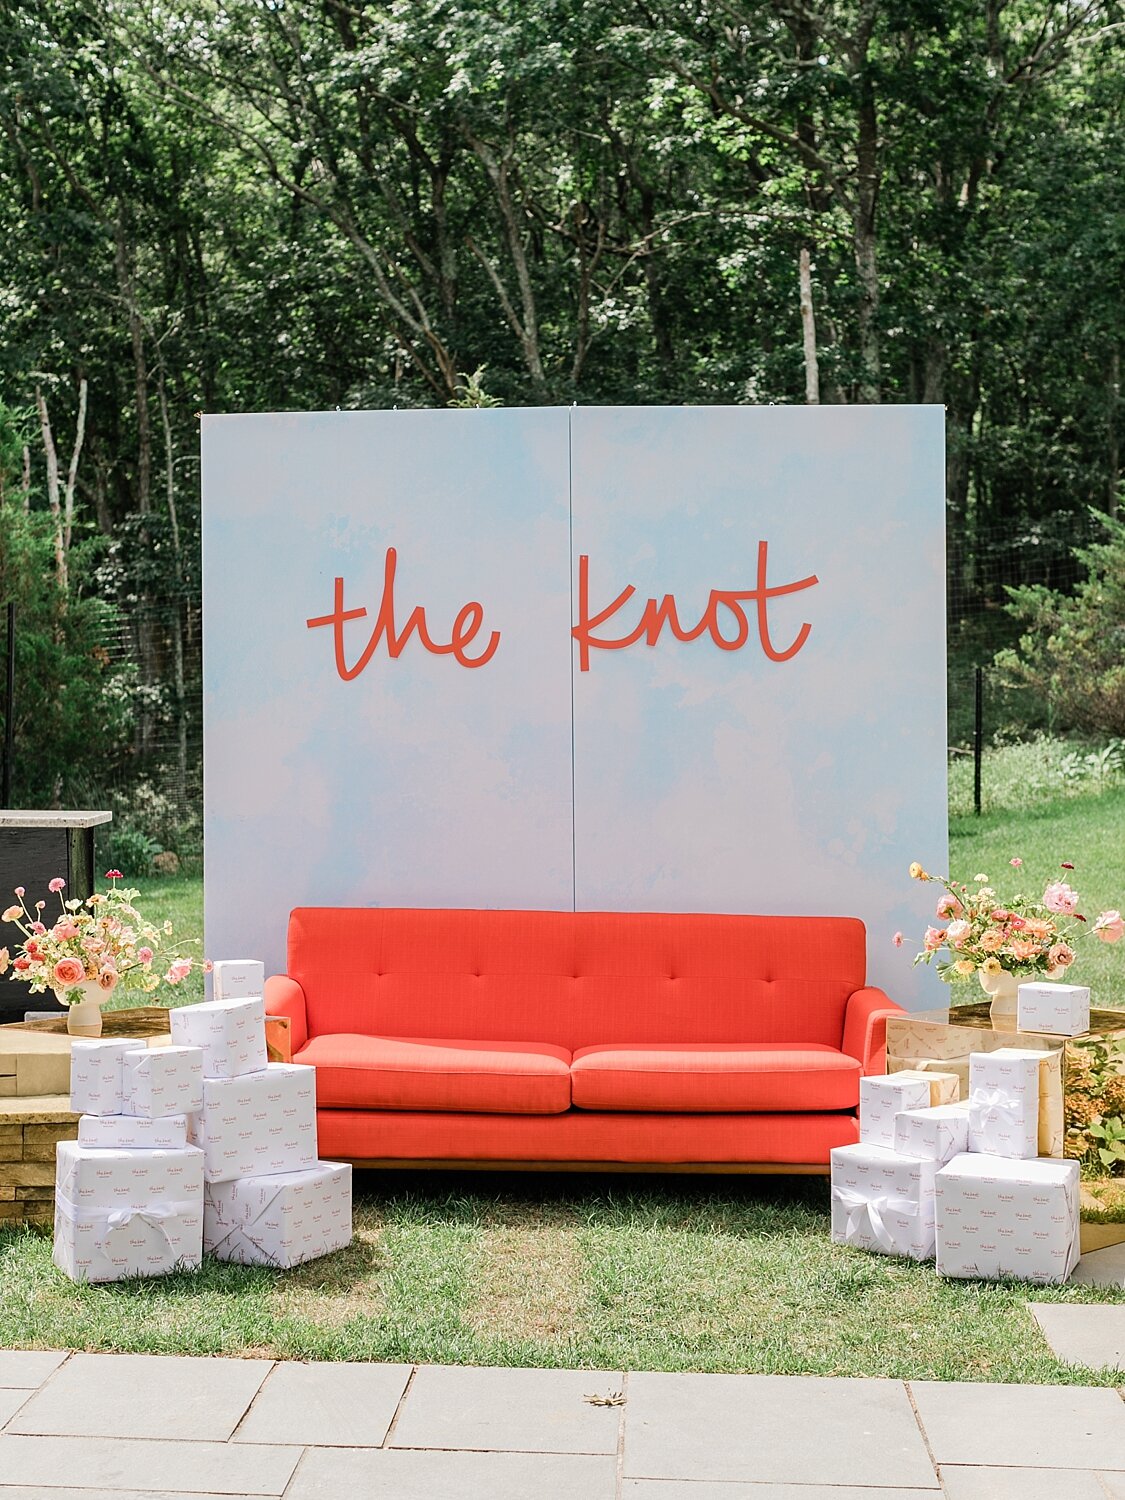 The Knot event with Rachel Lindsay